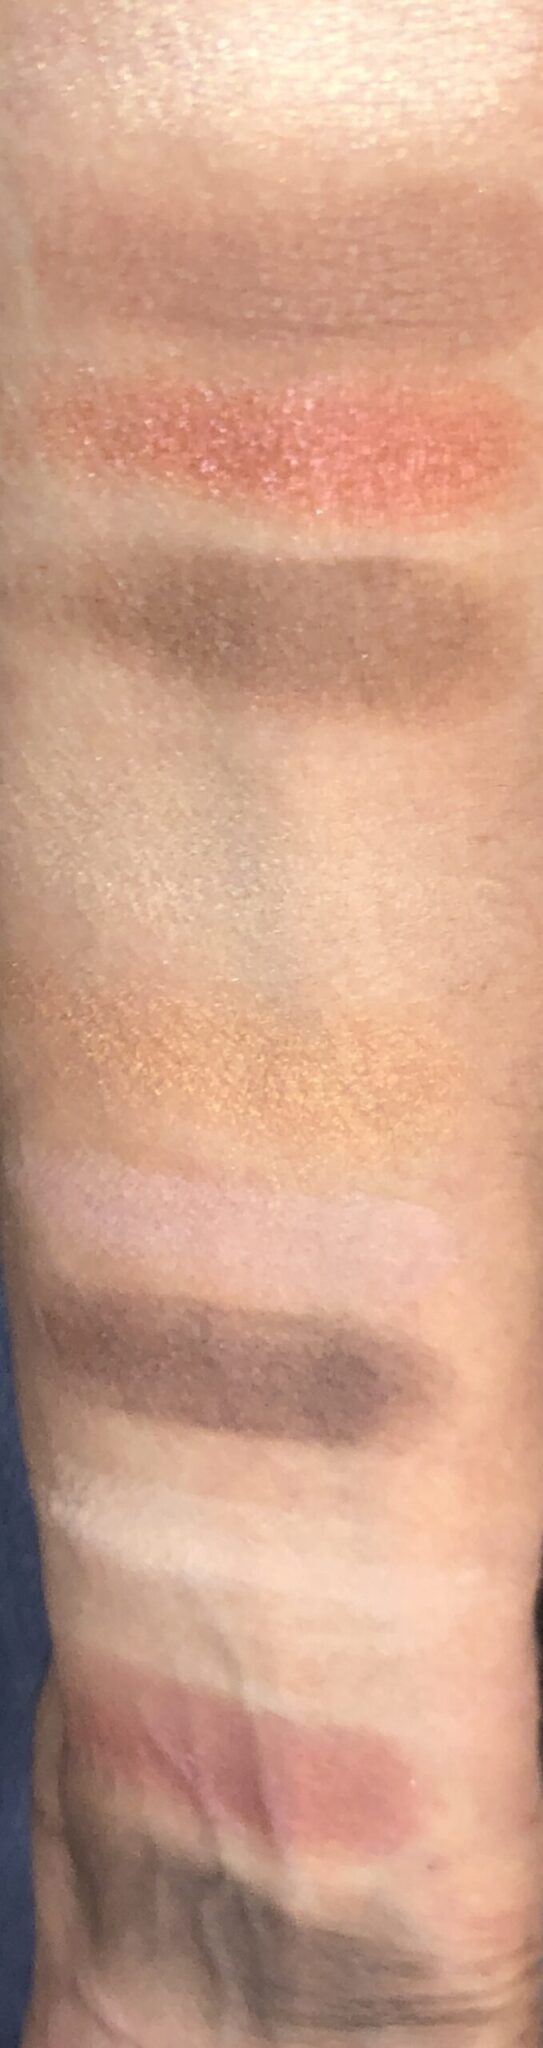 THE SWATCHES FOR THE KEVYN AUCOIN SOMETHING NUDE EYESHADOW PALETTE